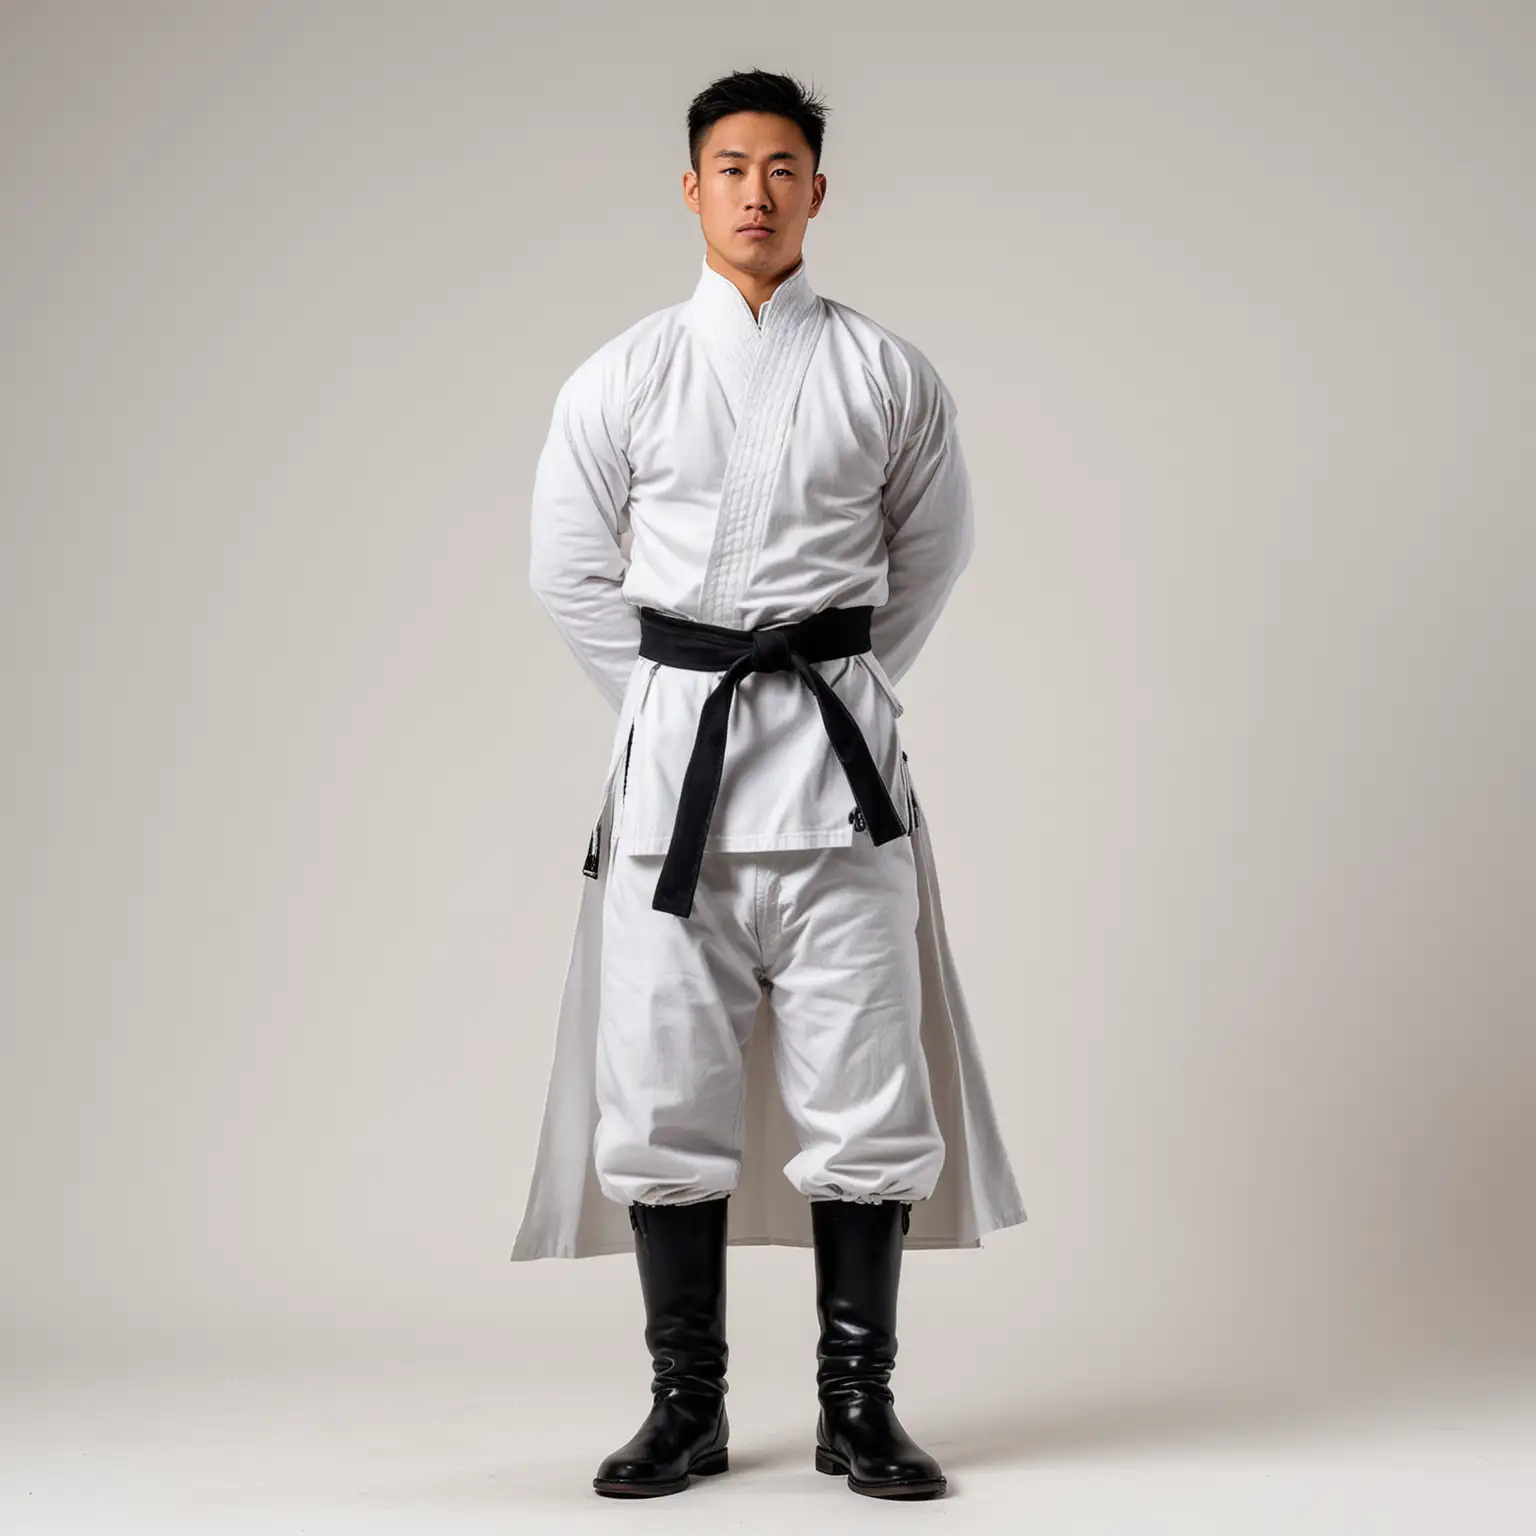 Standing front view, strong buff heroic Japanese man wearing white turtleneck karate gi with black fur accents, white cape, black boots, white background